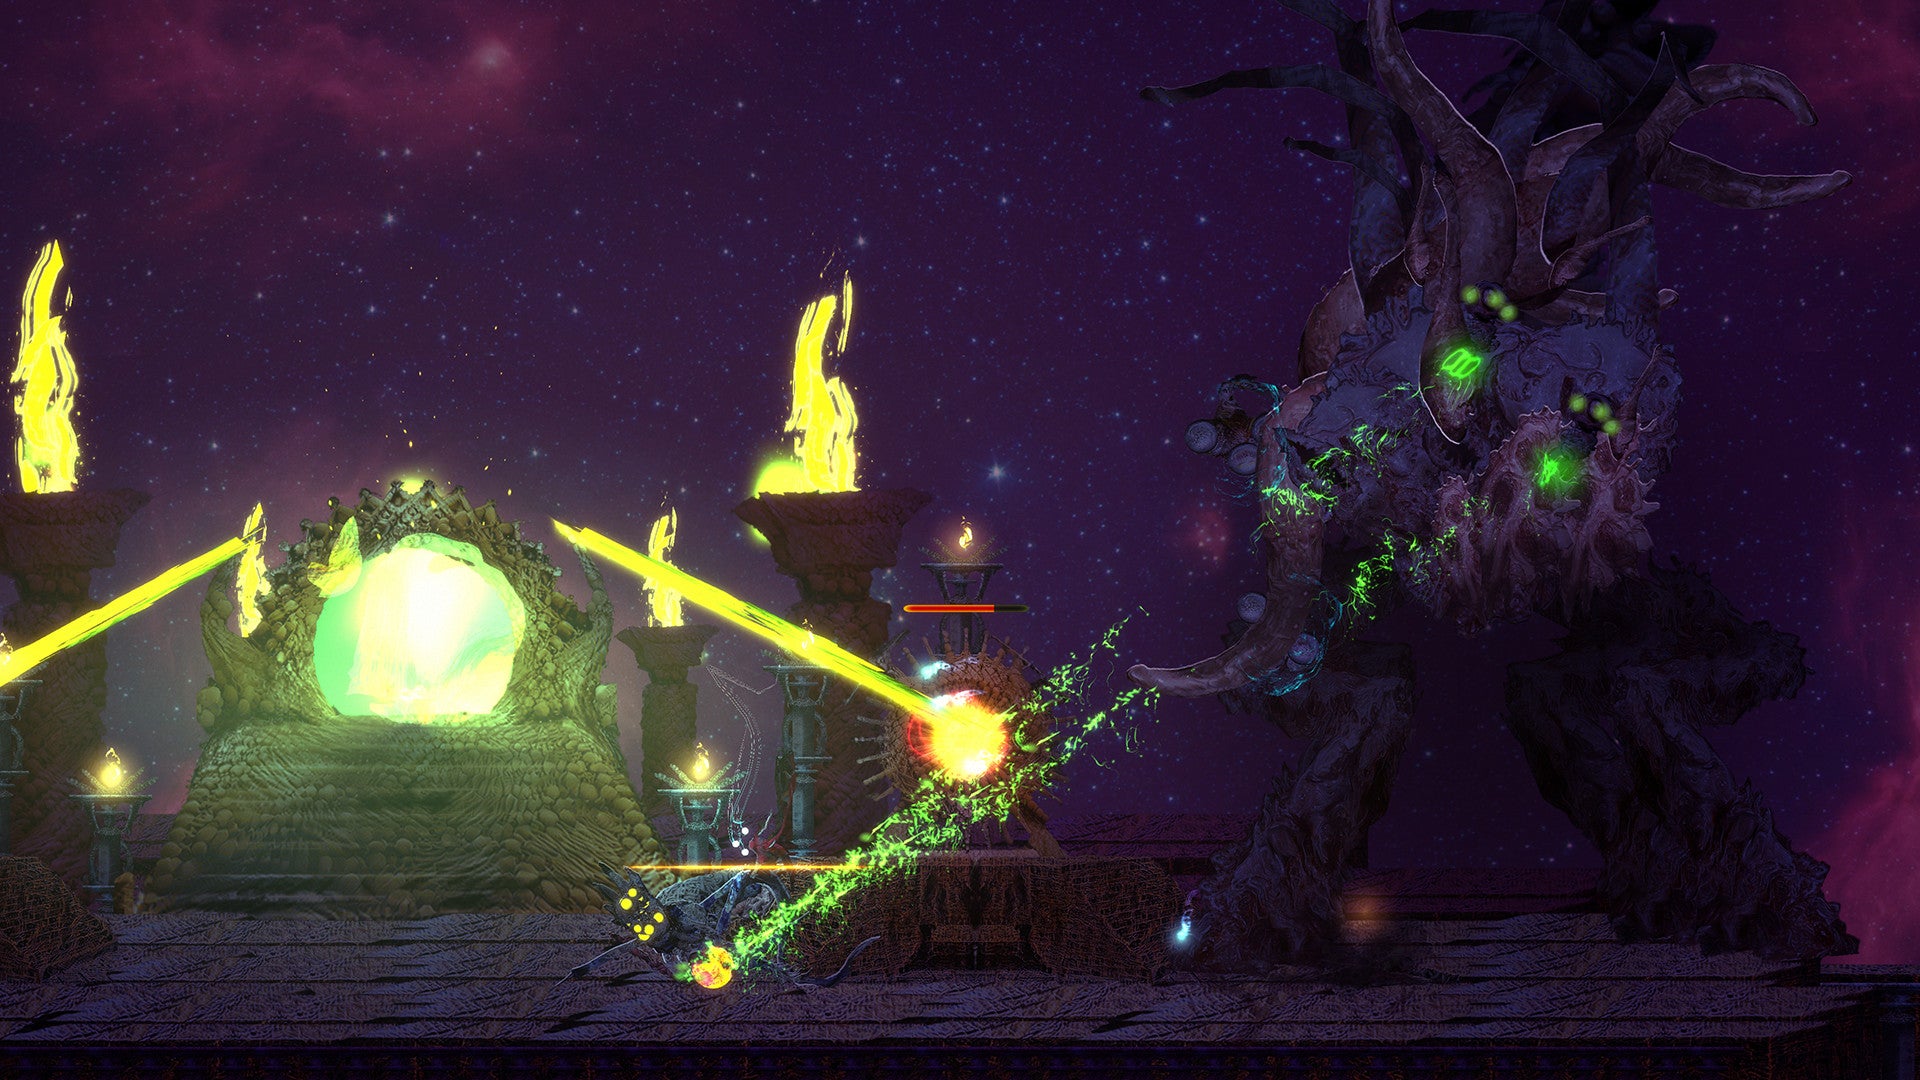 An Acolyte fights a Lovecraftian monstrosity as a green portal glows in the background.